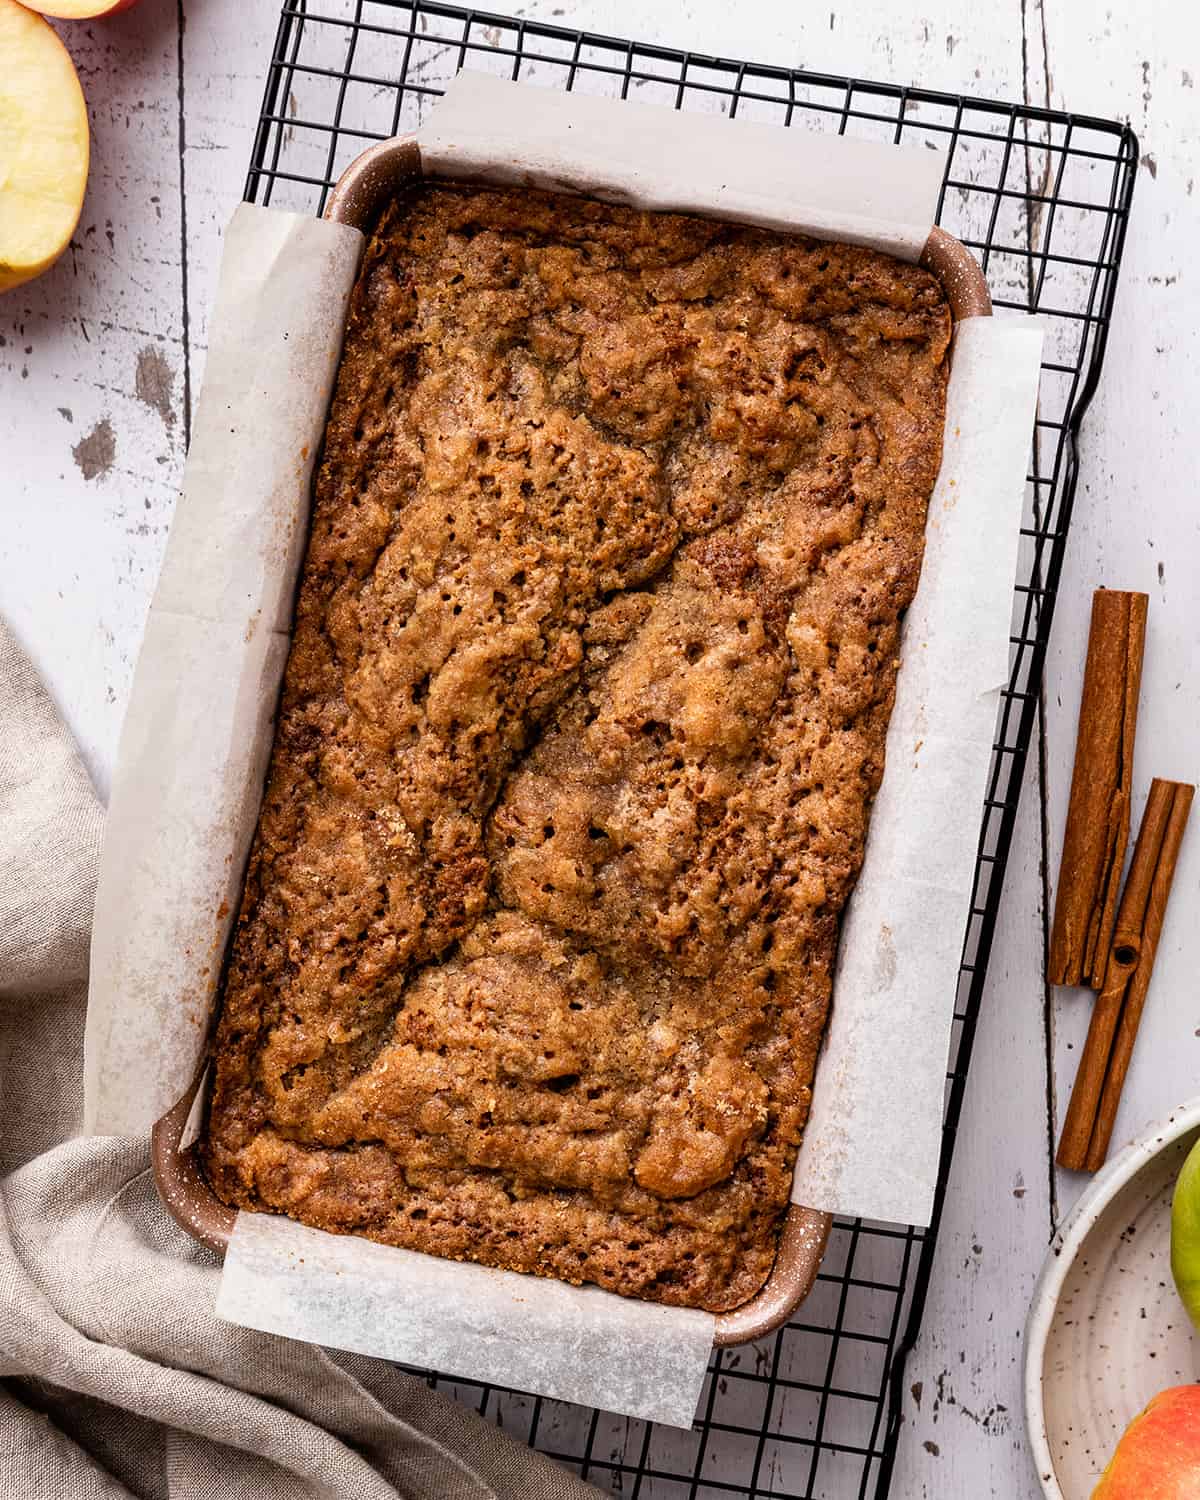 Cinnamon Apple Bread in a baking pan cooling on a wire rack